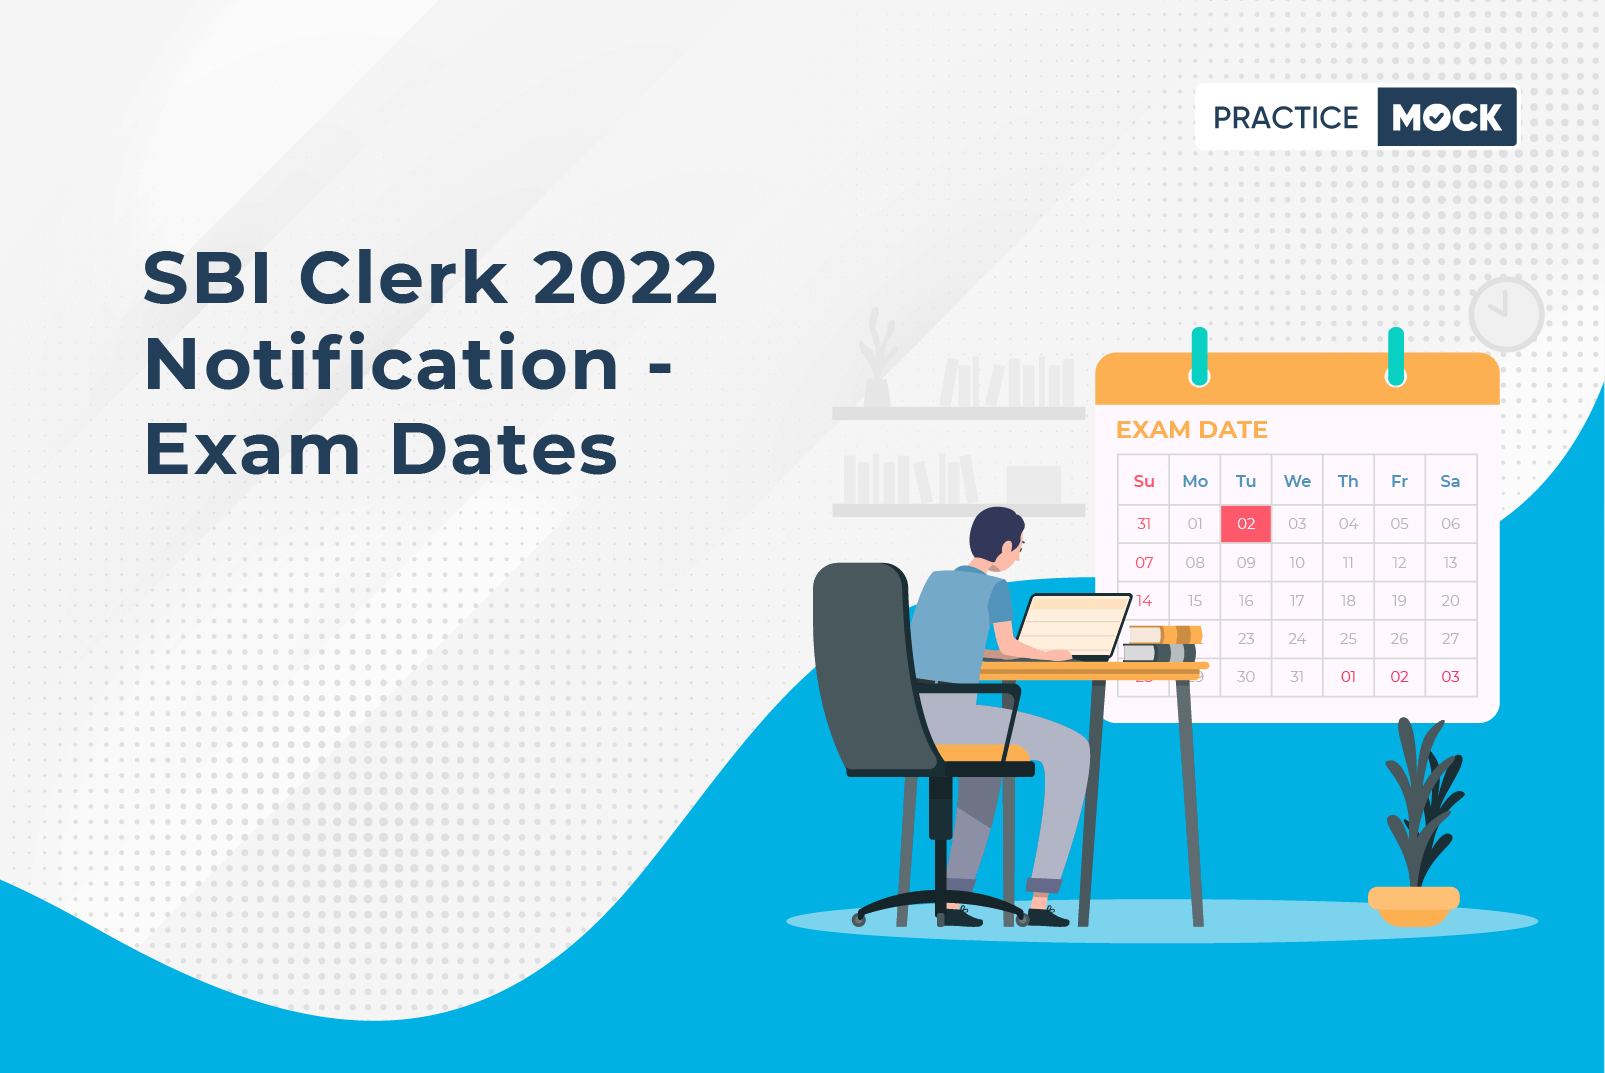 When will the SBI Clerk 2022 notification come?